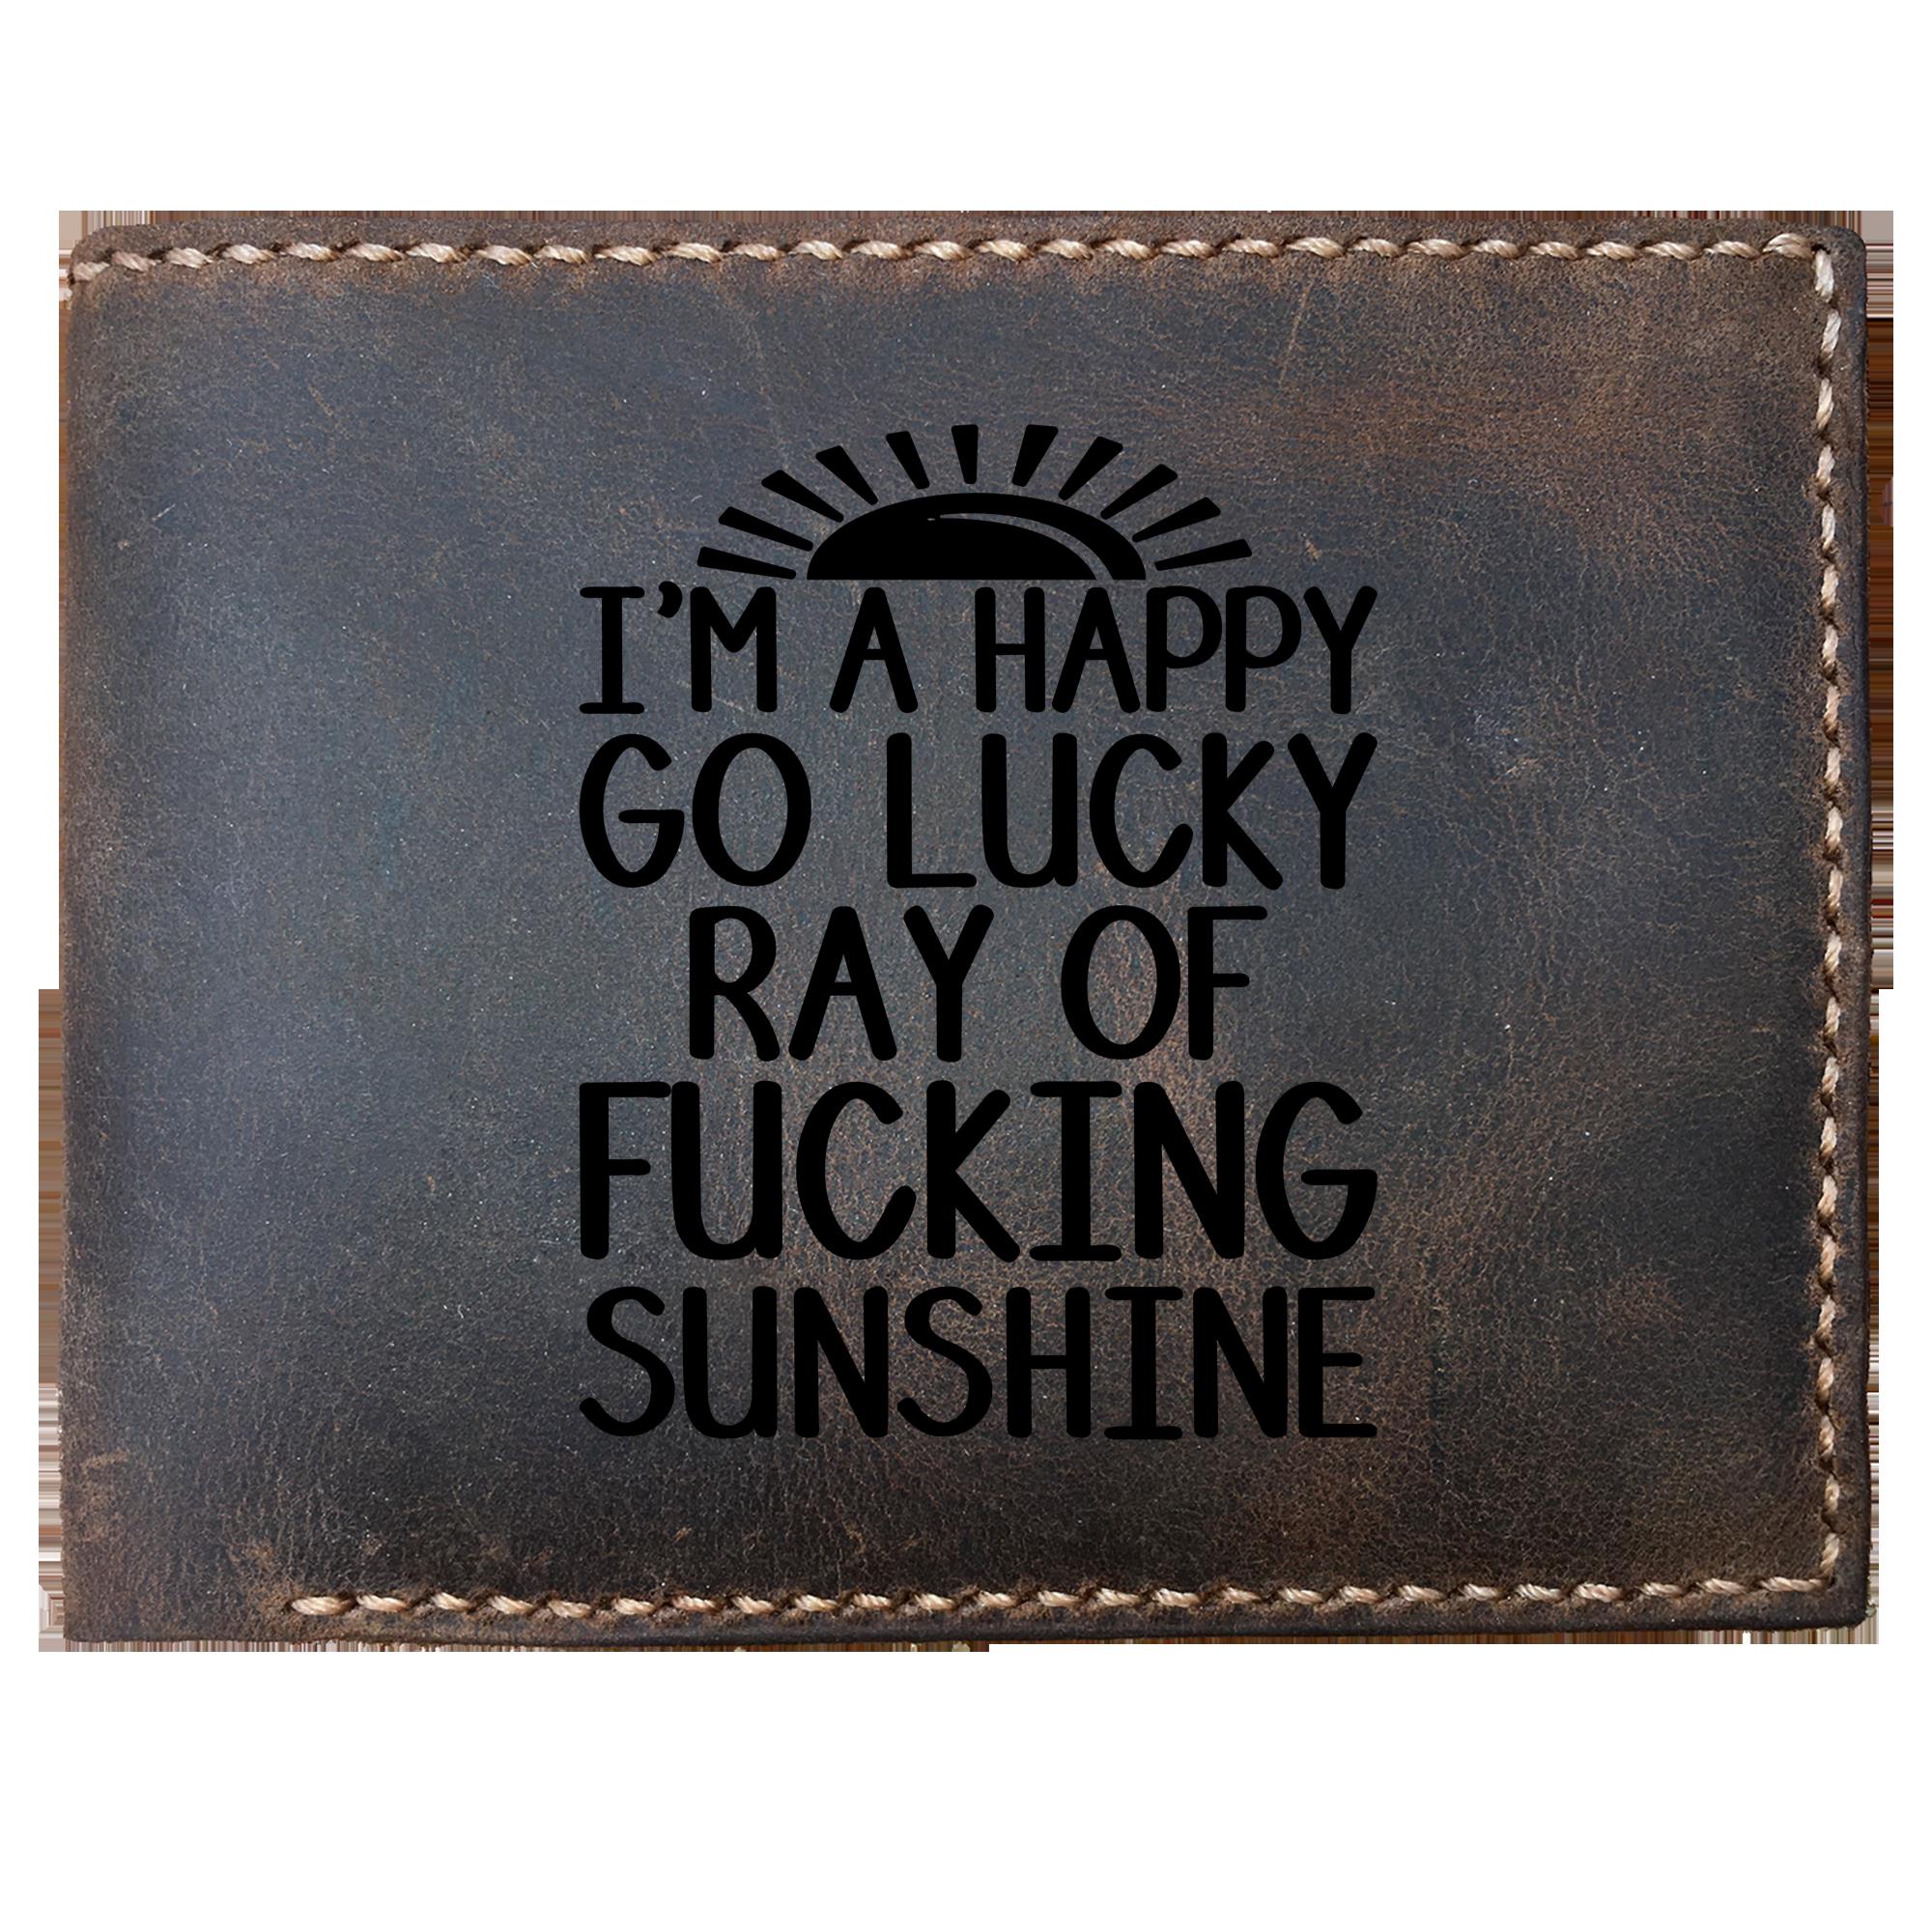 Skitongifts Funny Custom Laser Engraved Bifold Leather Wallet For Men, Im A Happy Go Lucky Ray Of Fucking Sunshine My Sunshine Funny